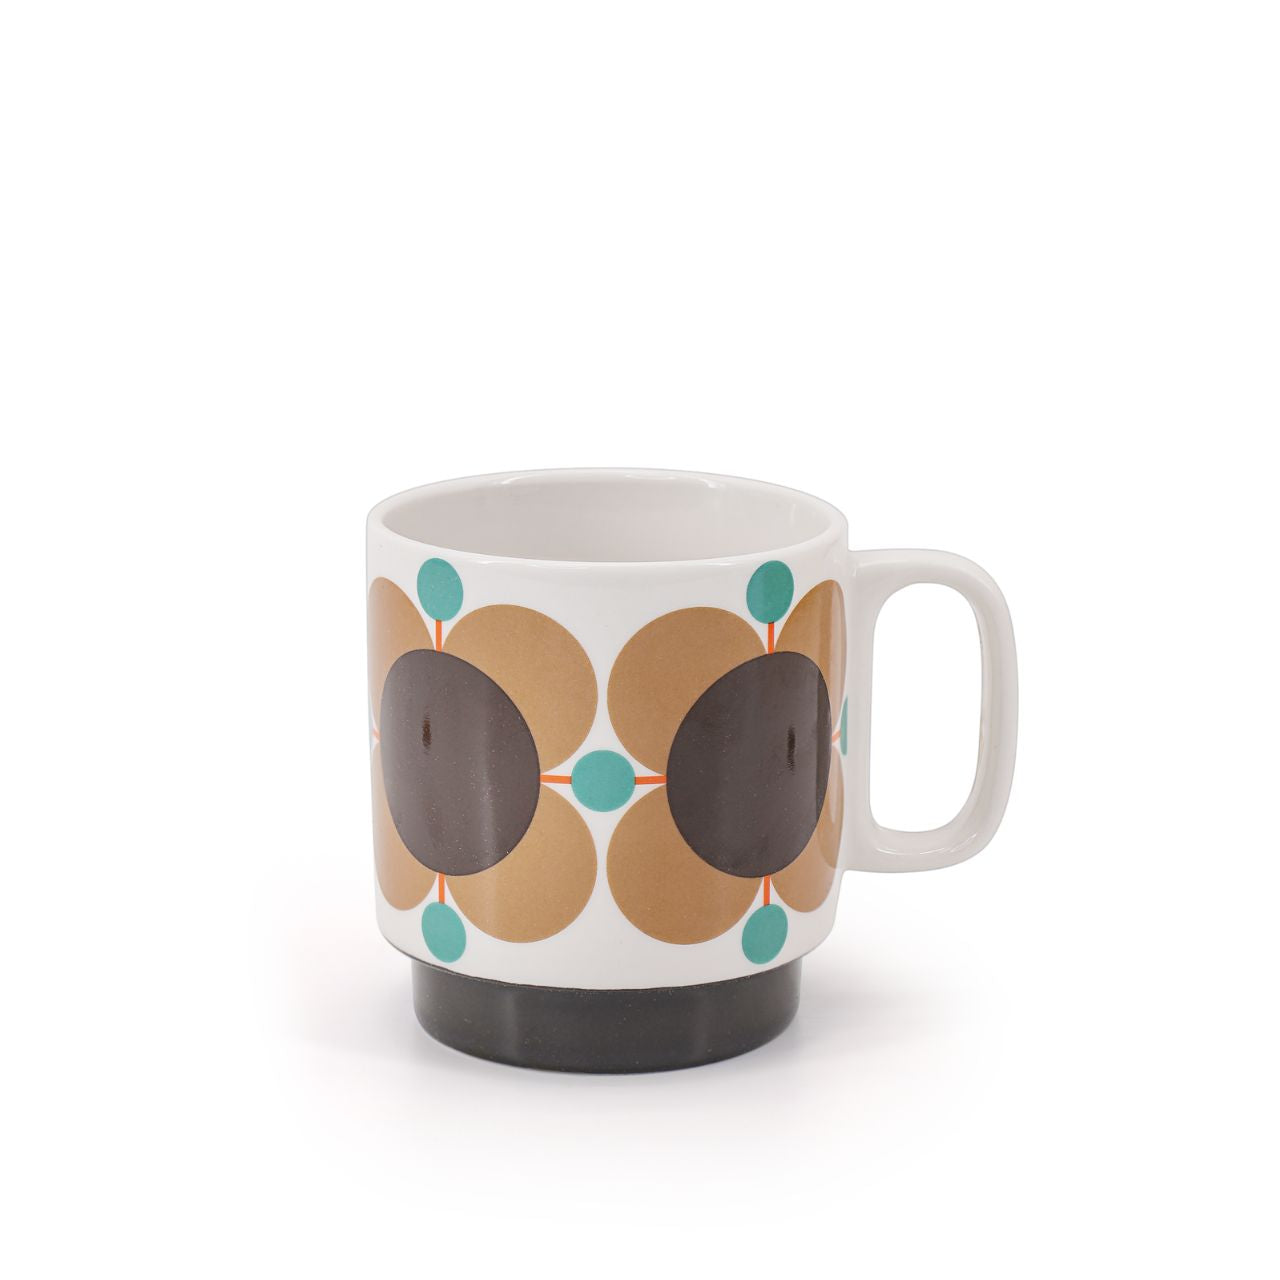 Tipperary Orla Kiely Atomic Flower Jewel Latte Set 2 Stacking Mugs  DESIGNED IN THE UK BY ORLA KIELY: This set of two mugs has a unique 'Atomic Flower' print and is designed to be stacked.  Each mug is stamped with an authentic Orla Kiely logo.